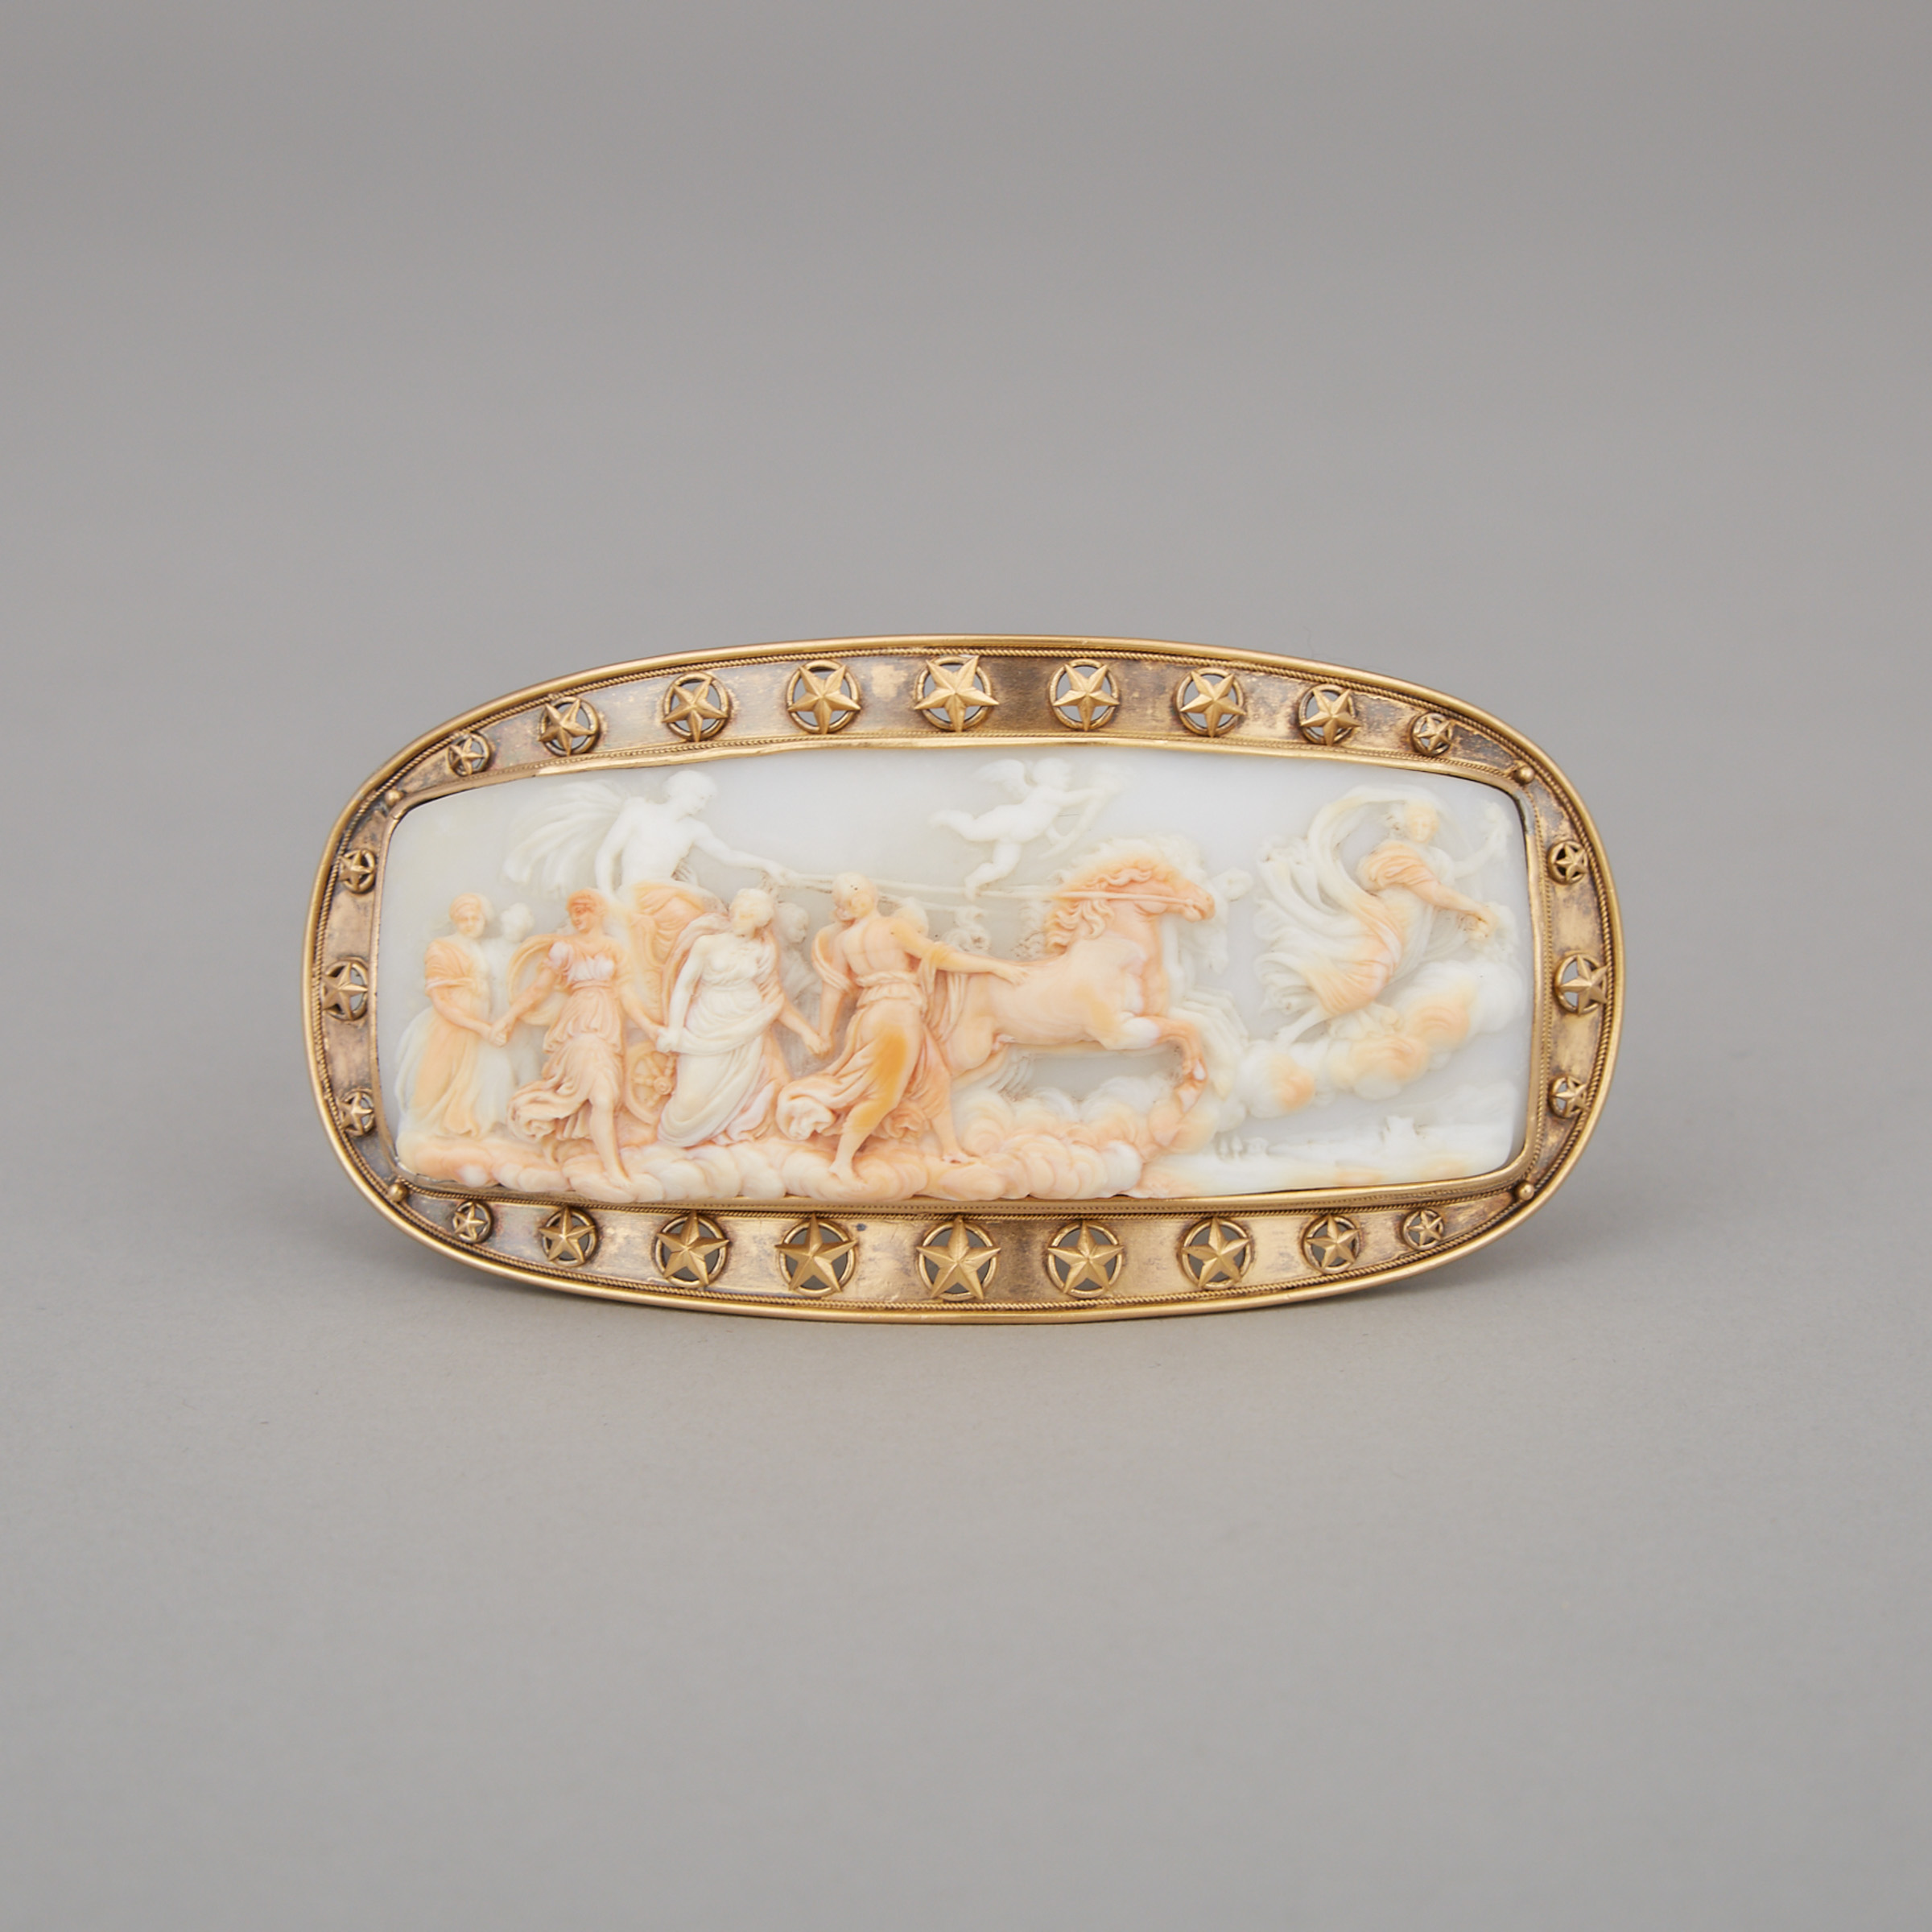 Italian Shell Cameo Brooch Carved after Guido Reni's L'Aurora, 19th century